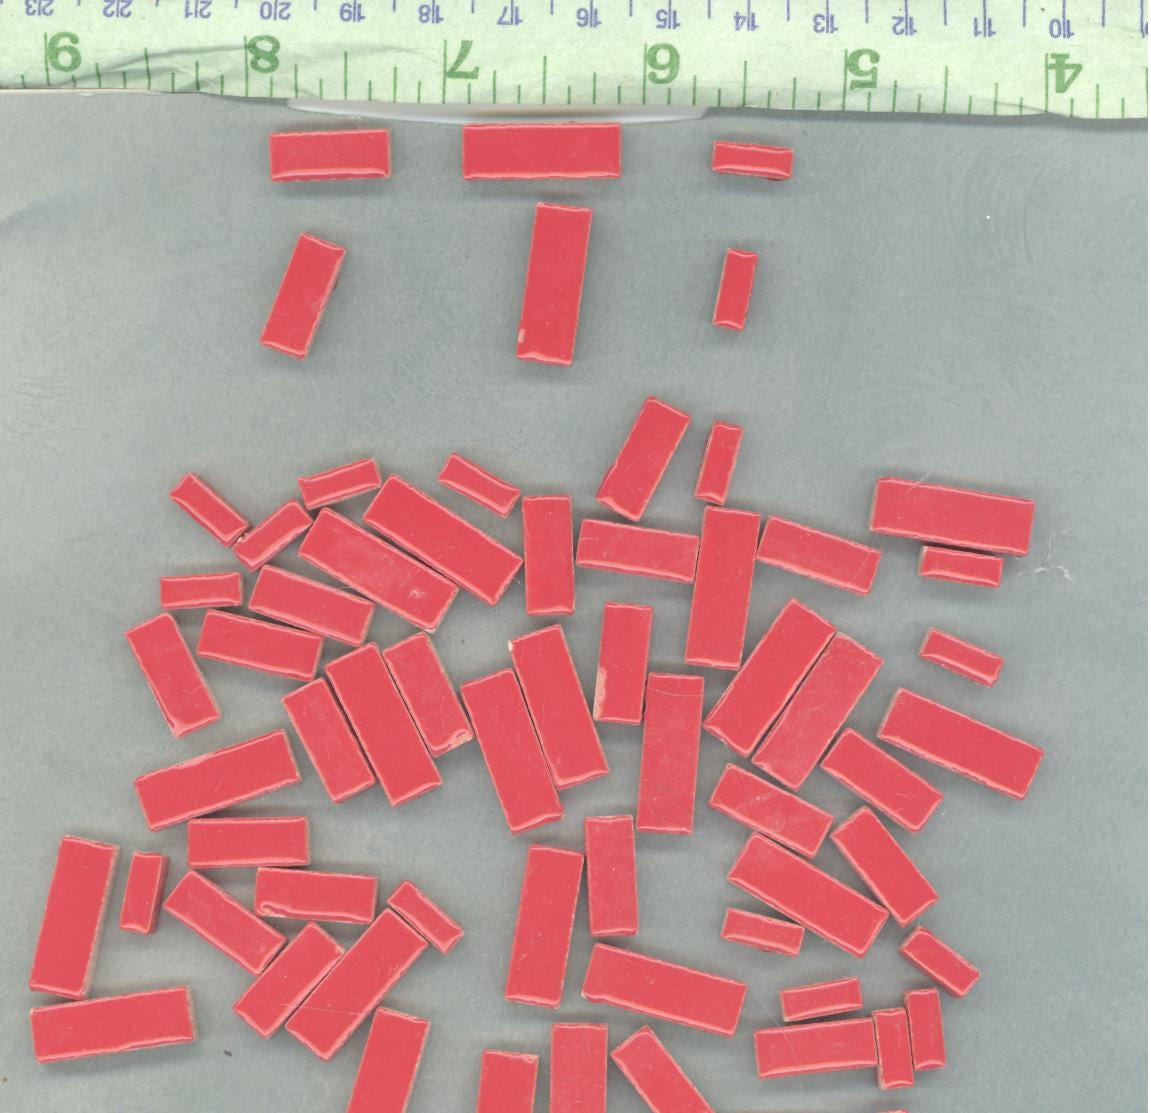 Bright Red Mini Rectangles Mosaic Tiles - 50g Ceramic in Mix of 3 Sizes 3/8" and 5/8" and 3/4"